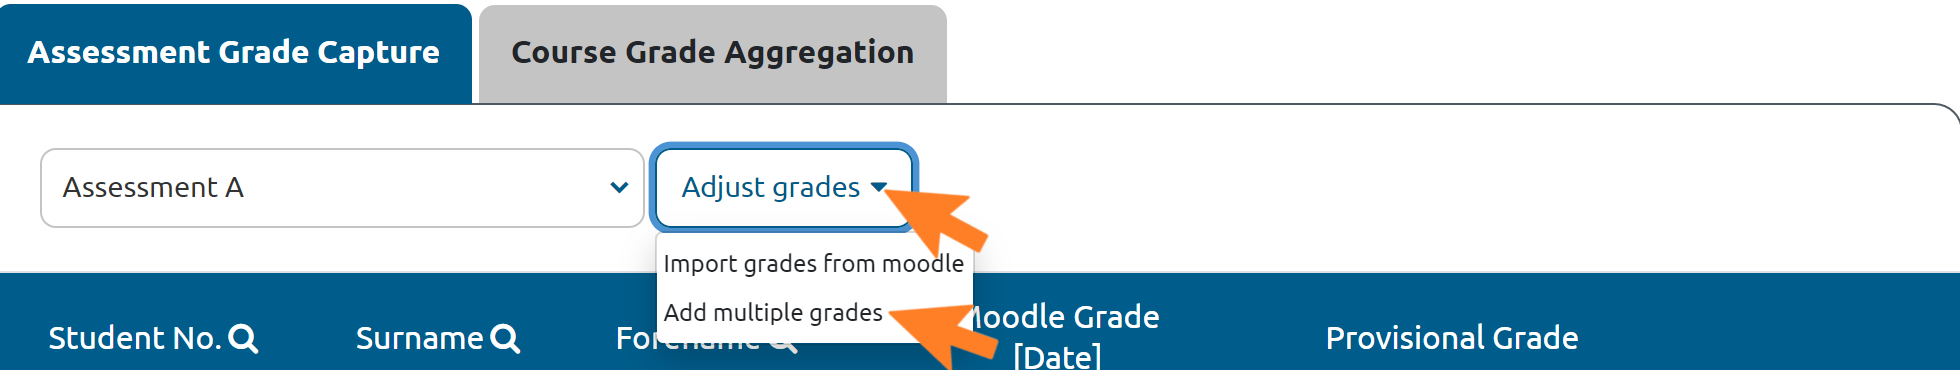 Grade adjustment dropdown menu, with 'Add multiple grades' highlighted with an arrow